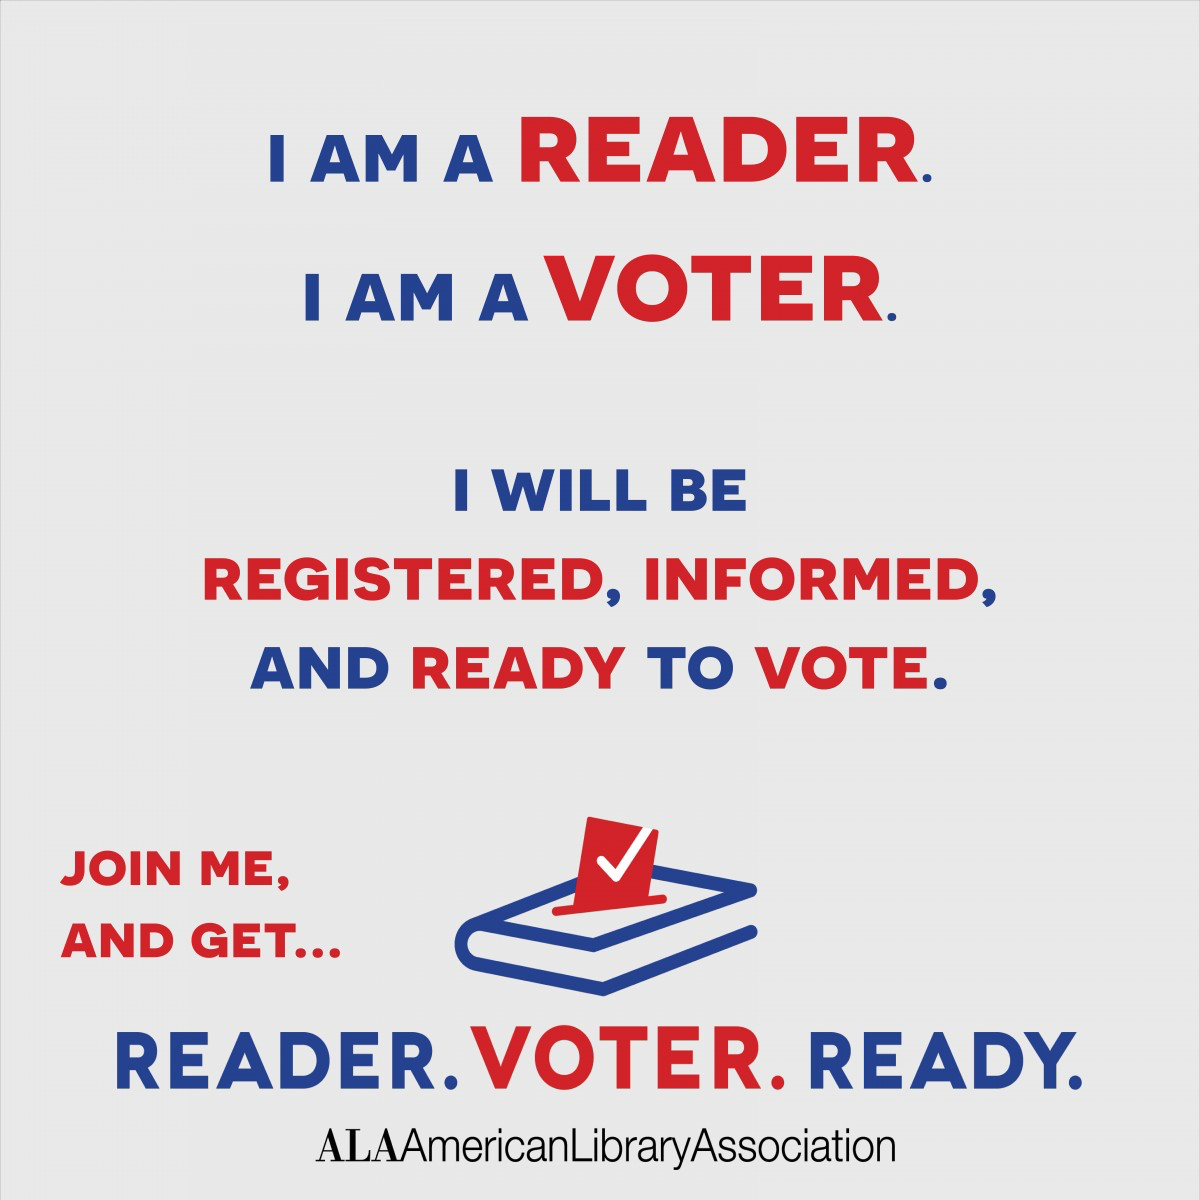 I am Readers, I am a Voter. I will be registered, informed and ready to vote.